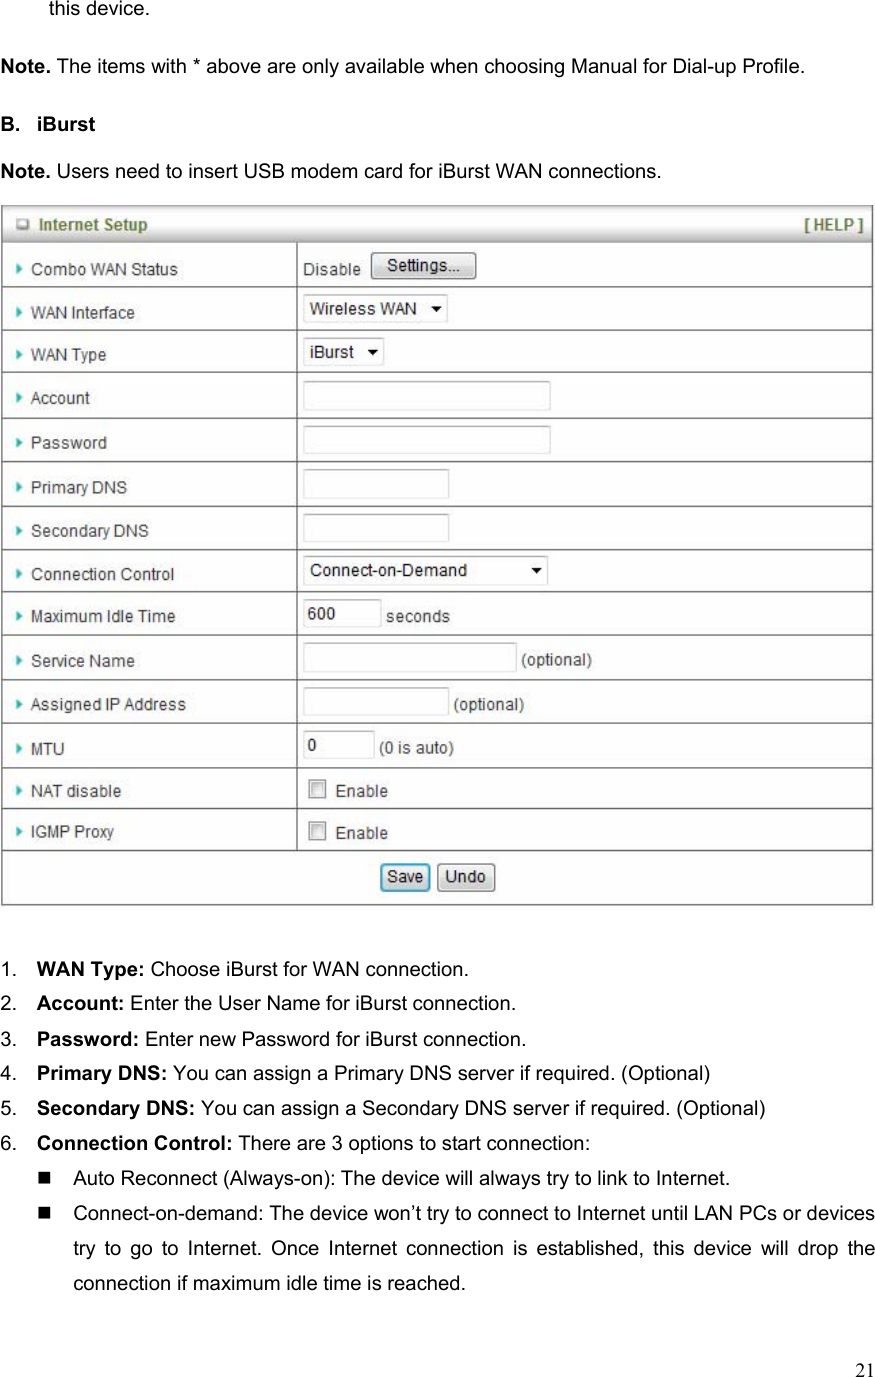  21this device.  Note. The items with * above are only available when choosing Manual for Dial-up Profile.    B. iBurst  Note. Users need to insert USB modem card for iBurst WAN connections.     1.  WAN Type: Choose iBurst for WAN connection. 2.  Account: Enter the User Name for iBurst connection. 3.  Password: Enter new Password for iBurst connection. 4.  Primary DNS: You can assign a Primary DNS server if required. (Optional) 5.  Secondary DNS: You can assign a Secondary DNS server if required. (Optional) 6.  Connection Control: There are 3 options to start connection:     Auto Reconnect (Always-on): The device will always try to link to Internet.       Connect-on-demand: The device won’t try to connect to Internet until LAN PCs or devices try to go to Internet. Once Internet connection is established, this device will drop the connection if maximum idle time is reached. 